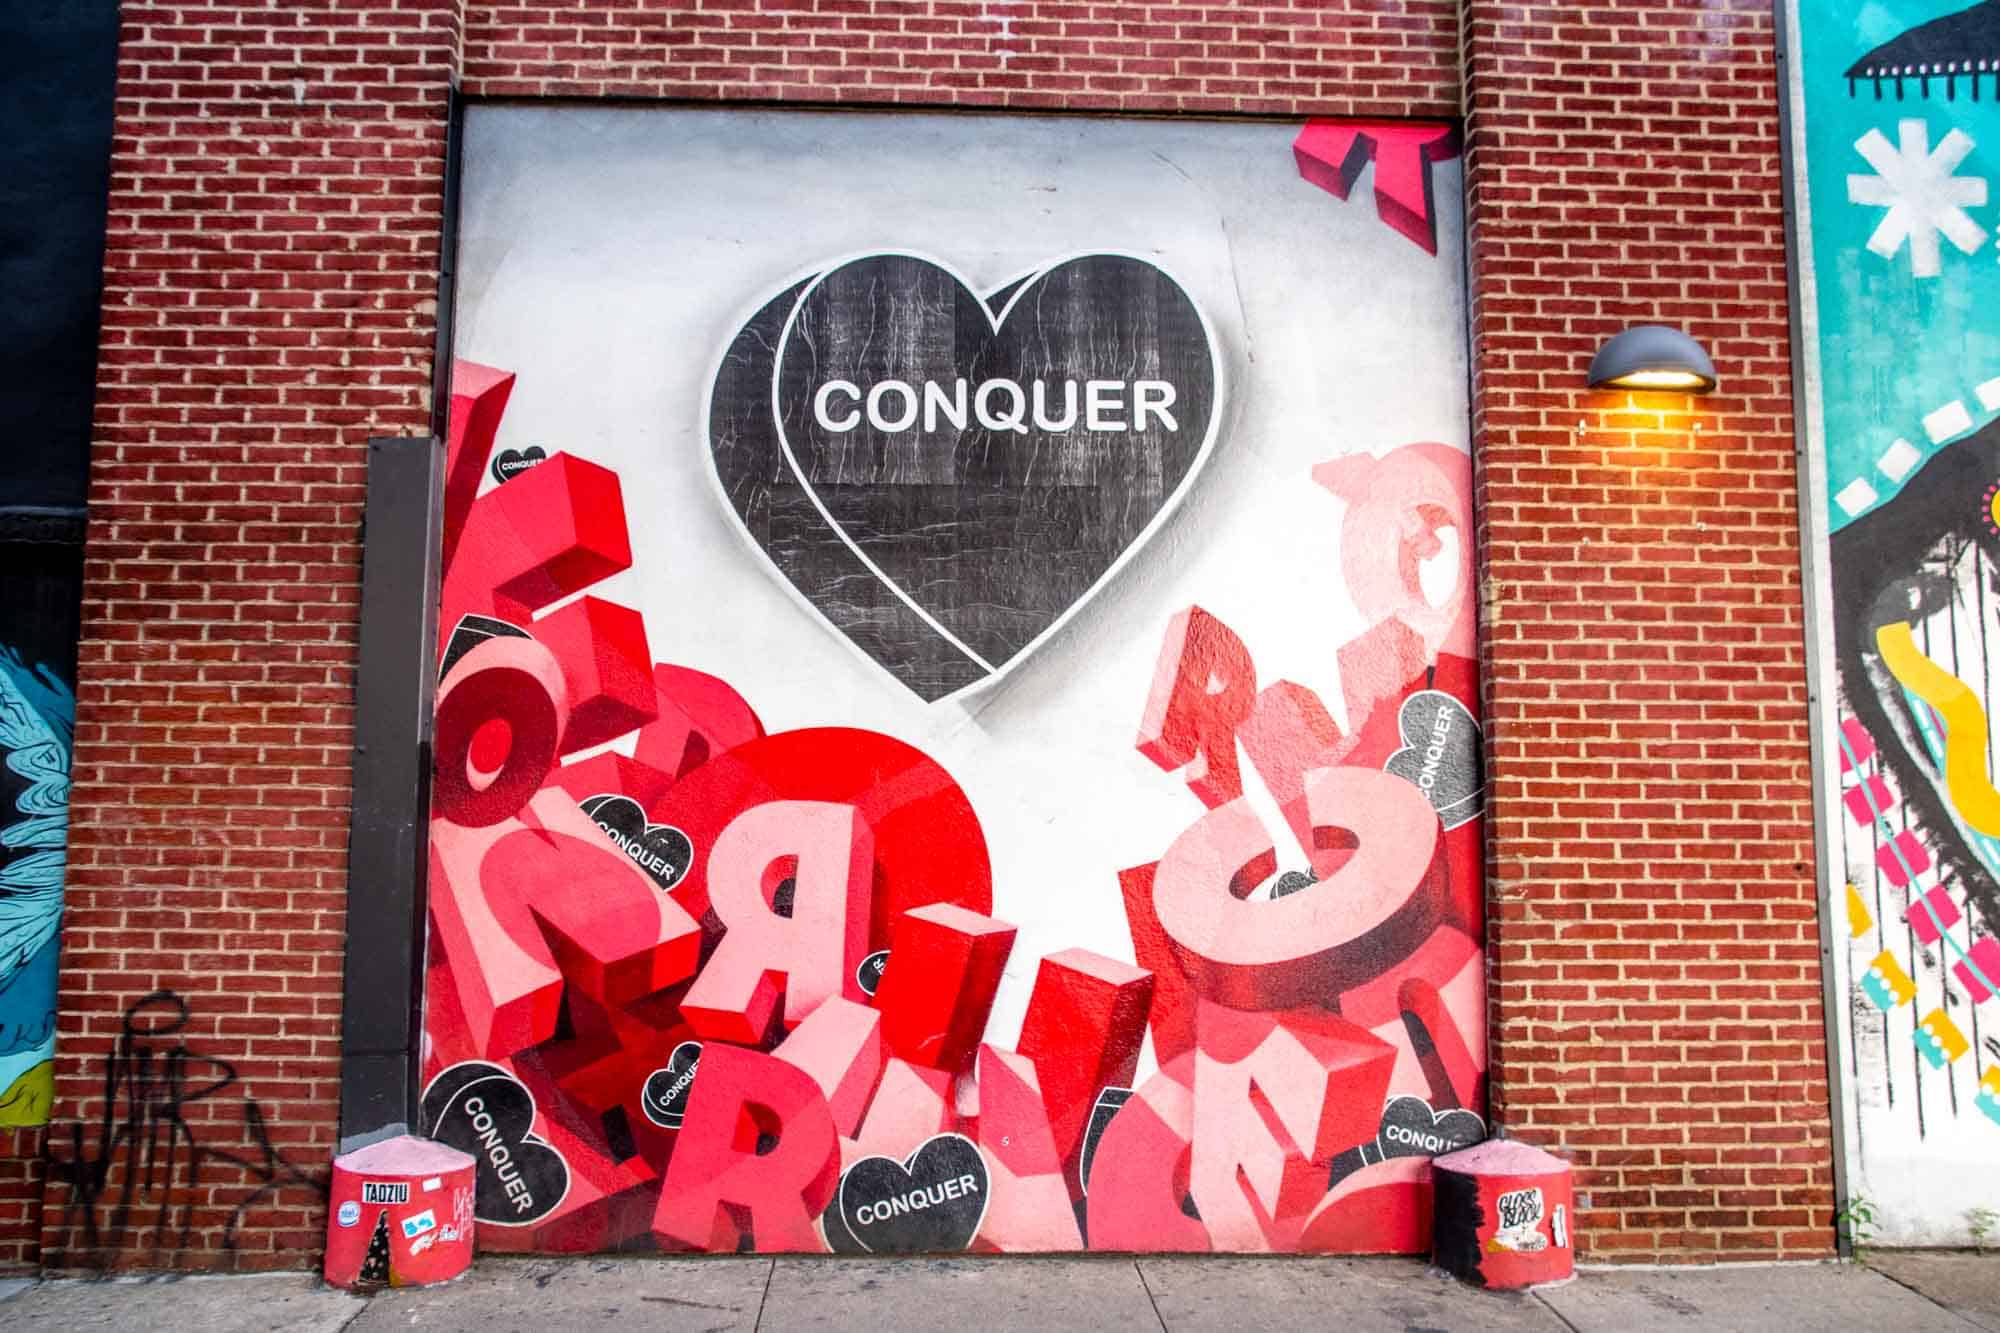 Mural saying Conquer by artist Amberella